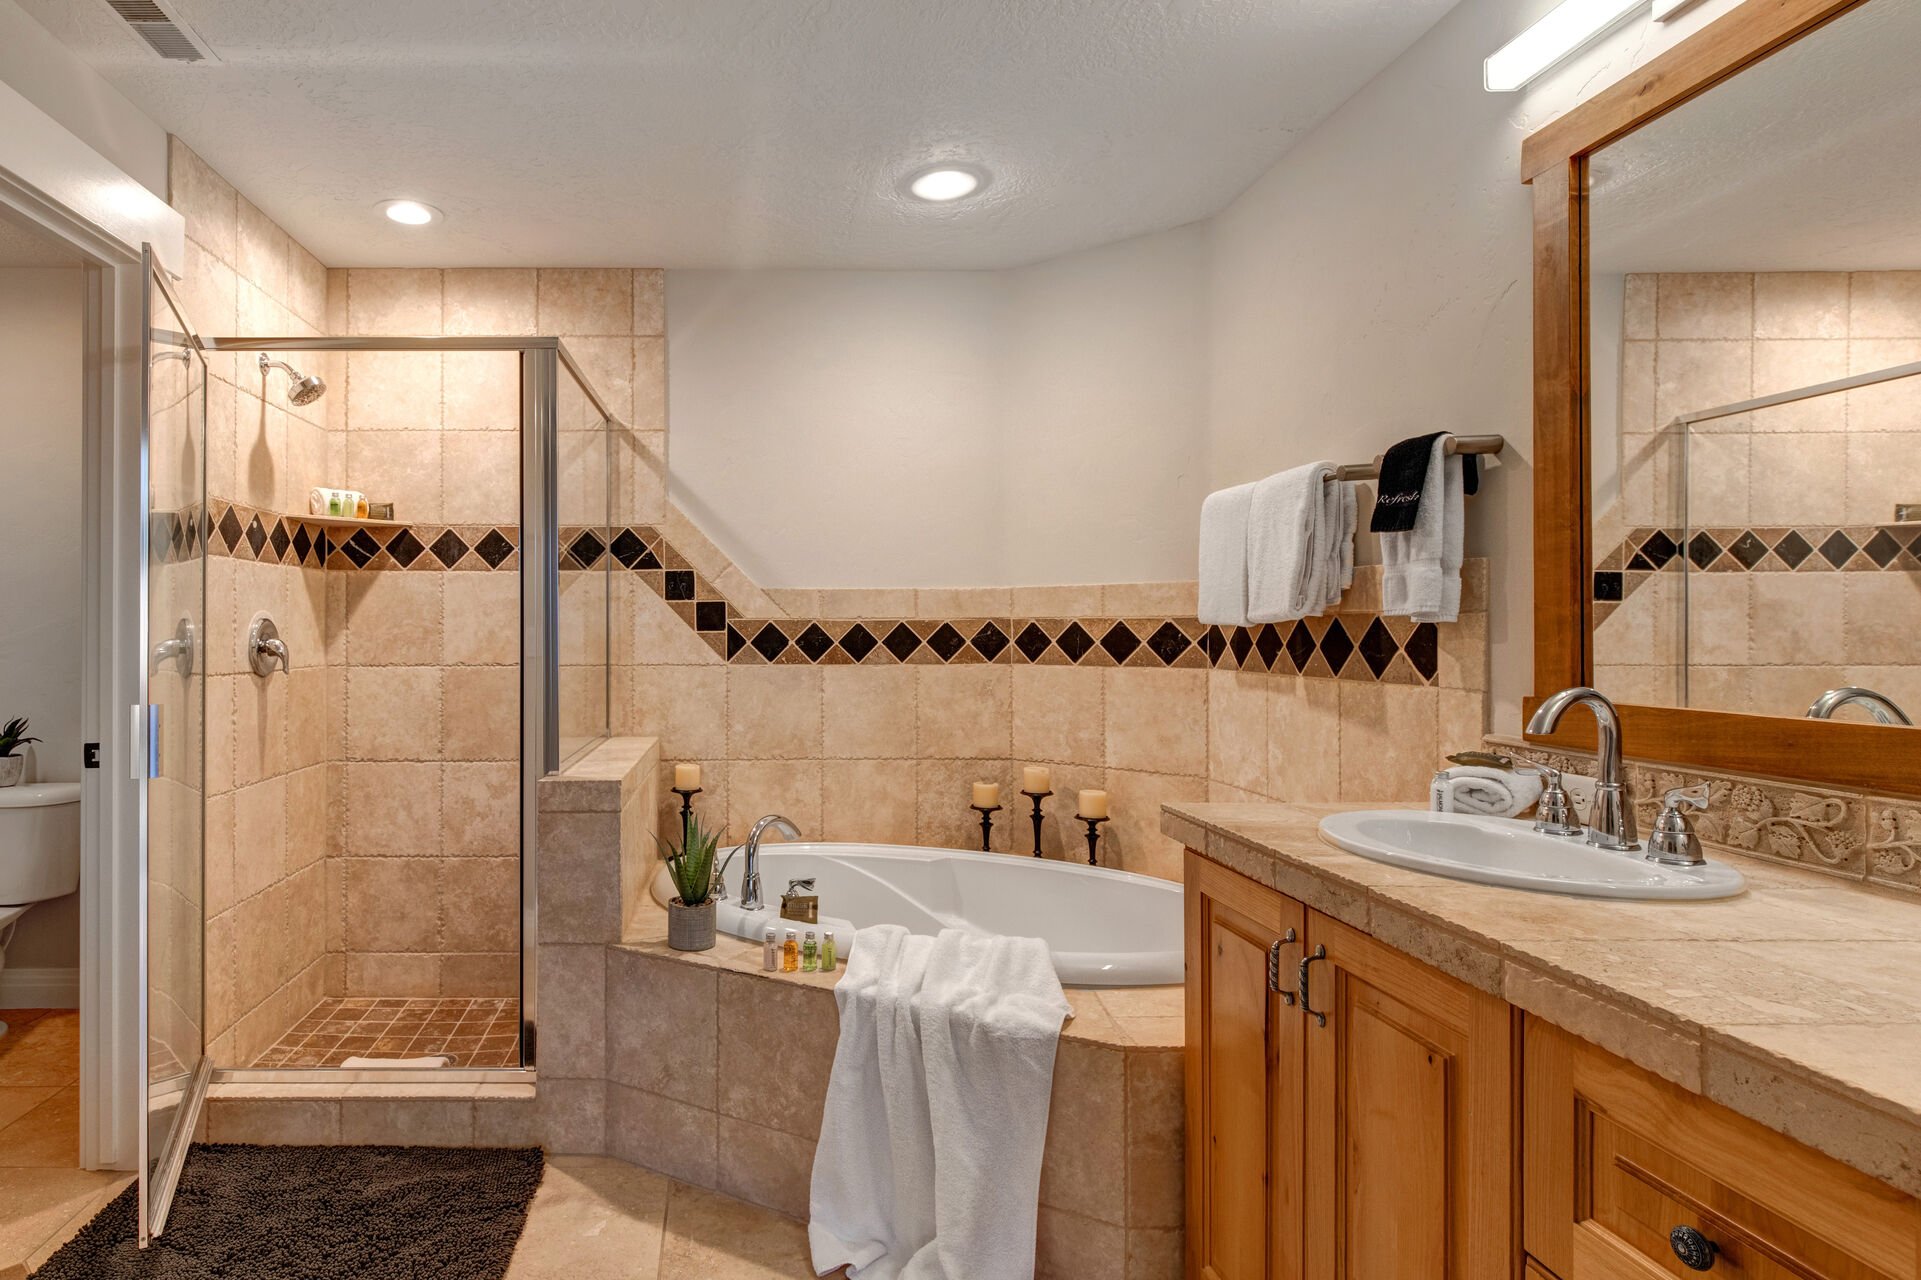 Master Bathroom with double sinks, soaking tub, tiled shower, and walk-in closet